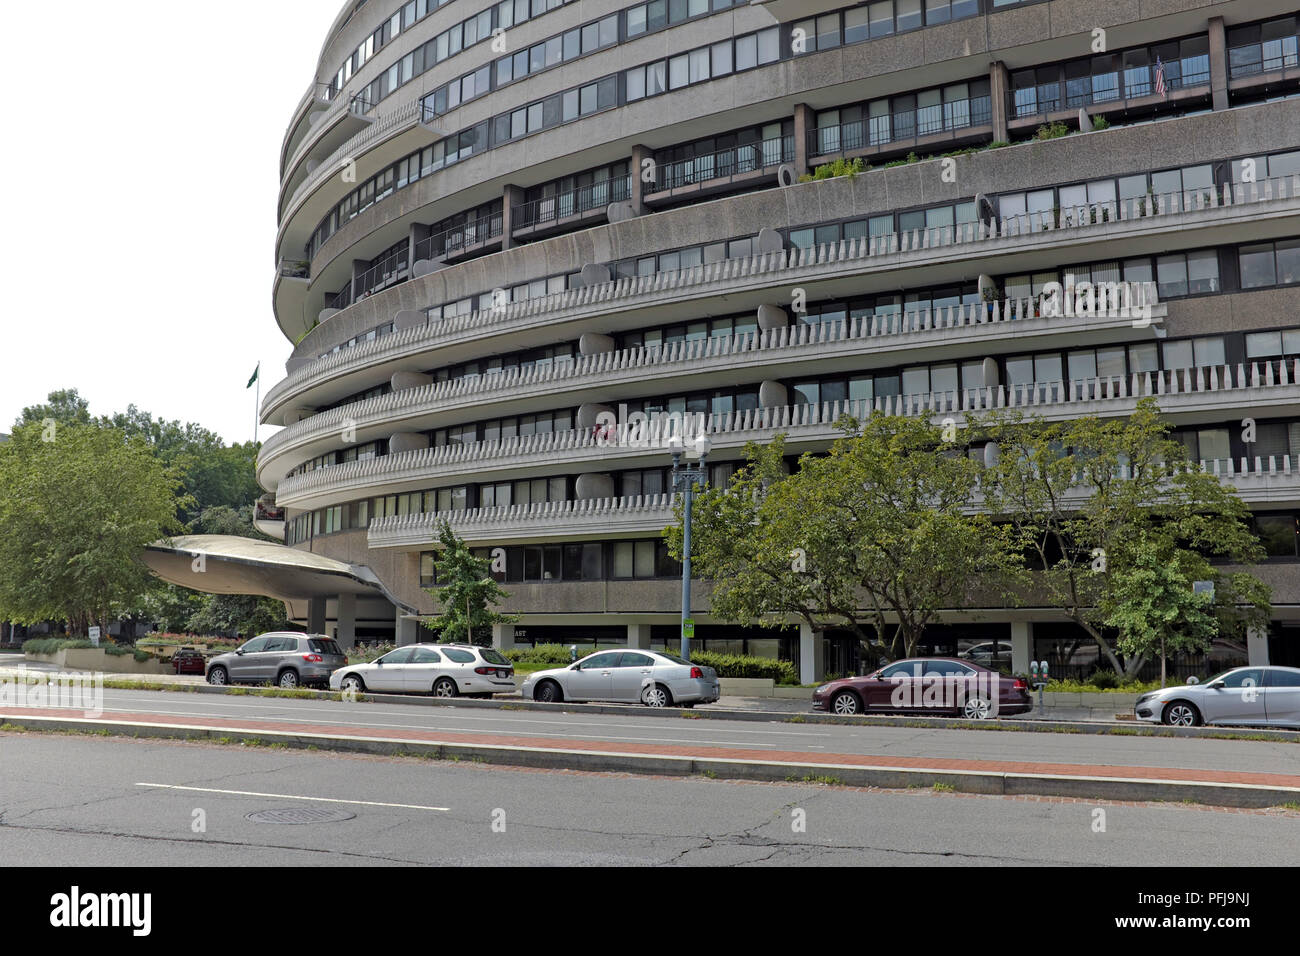 The exterior of the distinct Watergate Hotel in Washington, DC known for its historic role in the Watergate scandal. Stock Photo